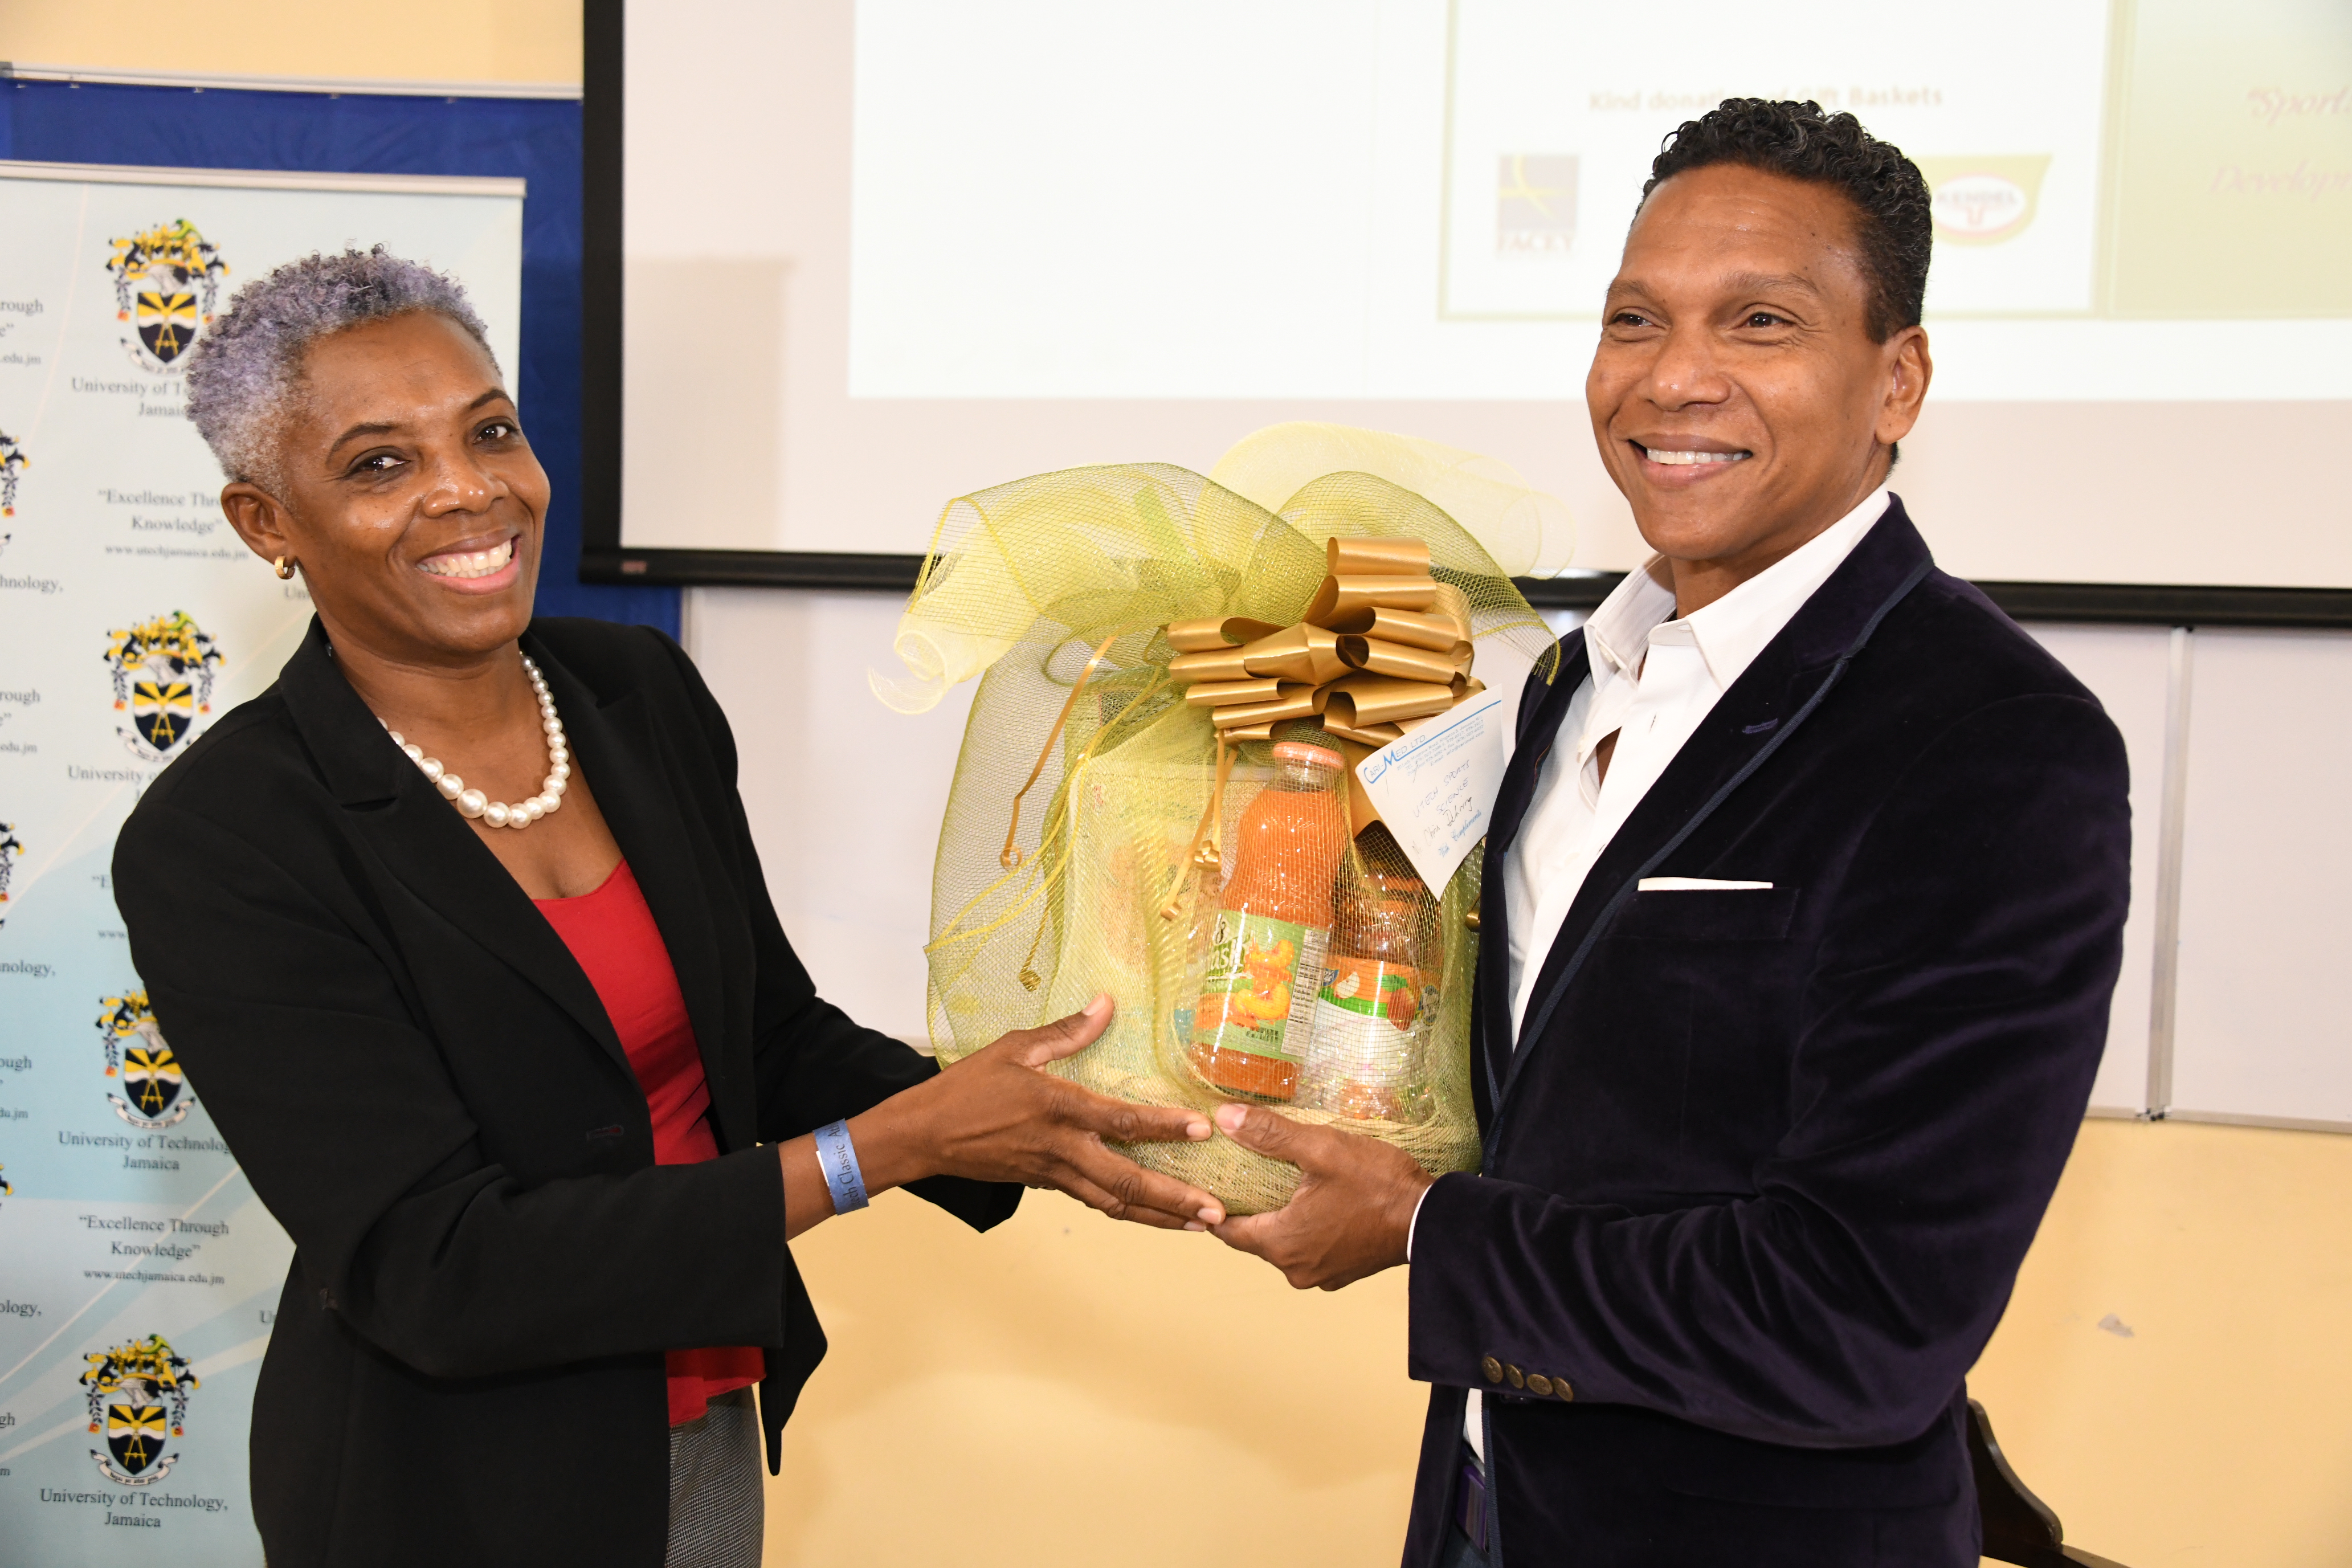 Caribbean Conference on Sport Sciences Focuses on Golden Opportunities for Wealth Creation in Sport